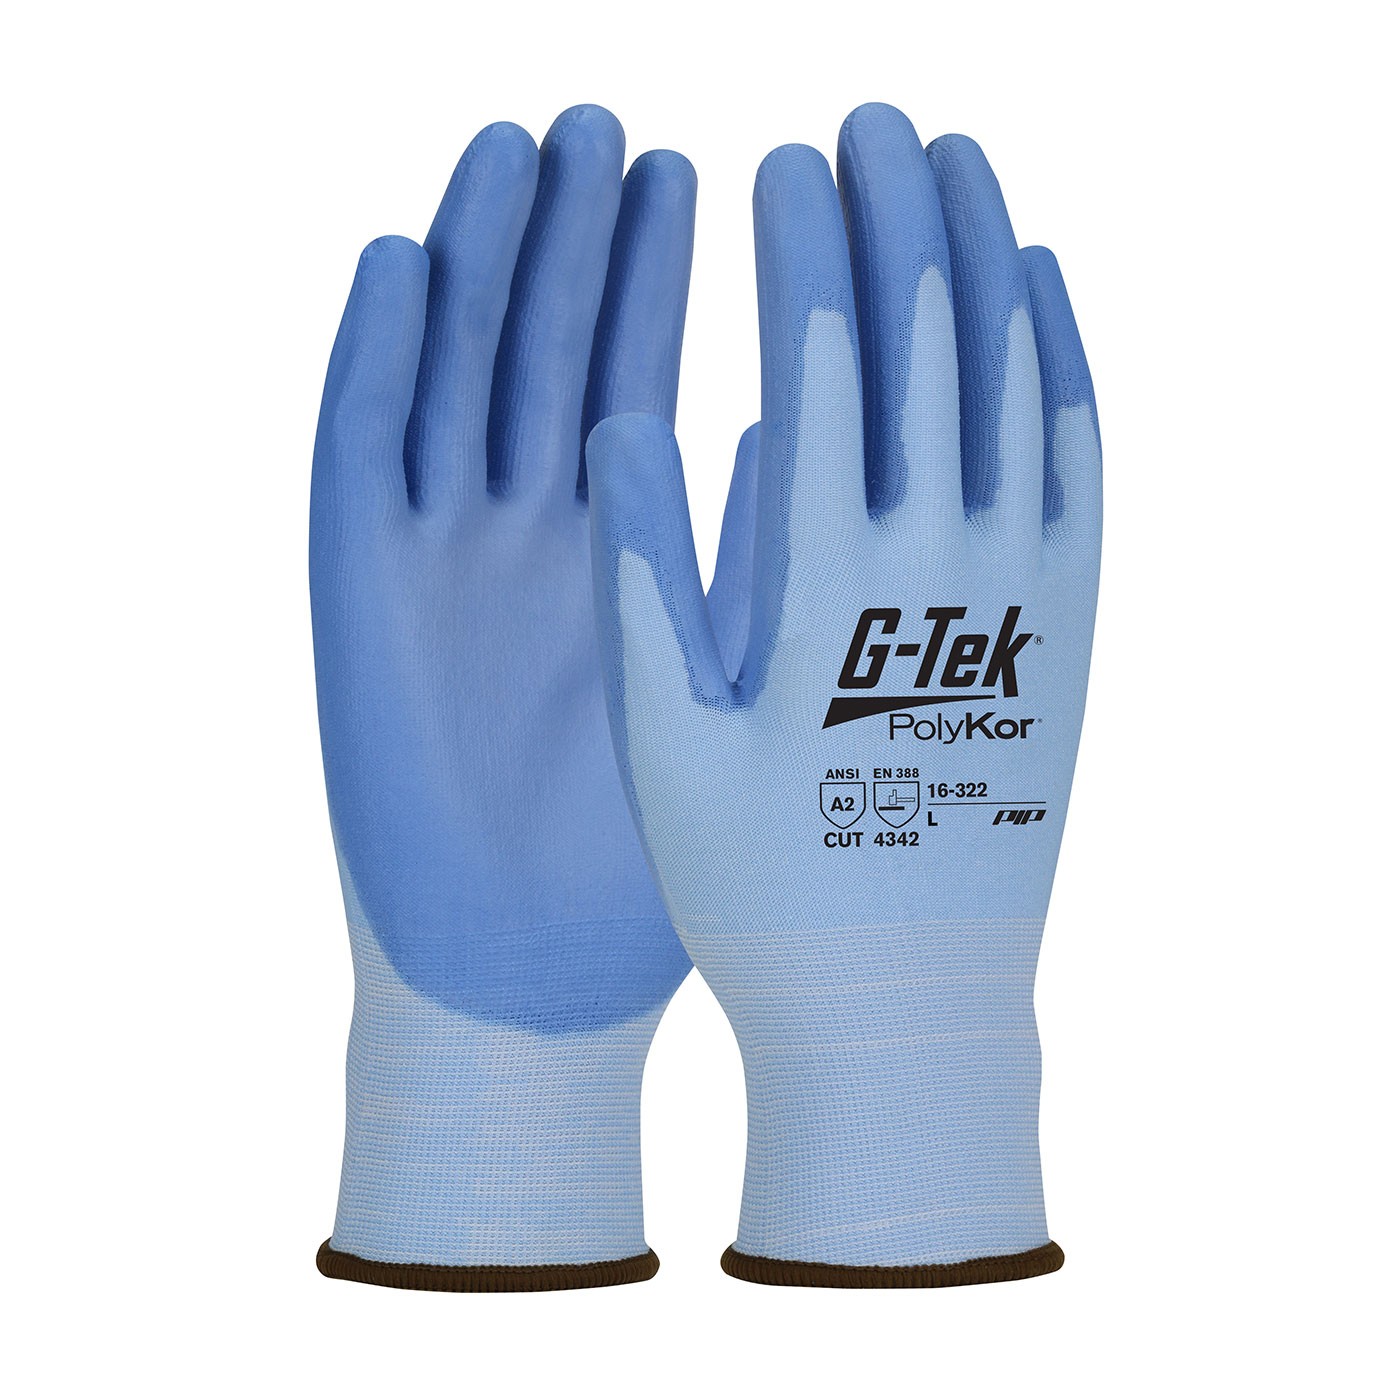 G-Tek® PolyKor® Premium Seamless Knit PolyKor® Blended Glove with Polyurethane Coated Smooth Grip on Palm & Fingers  (#16-322)